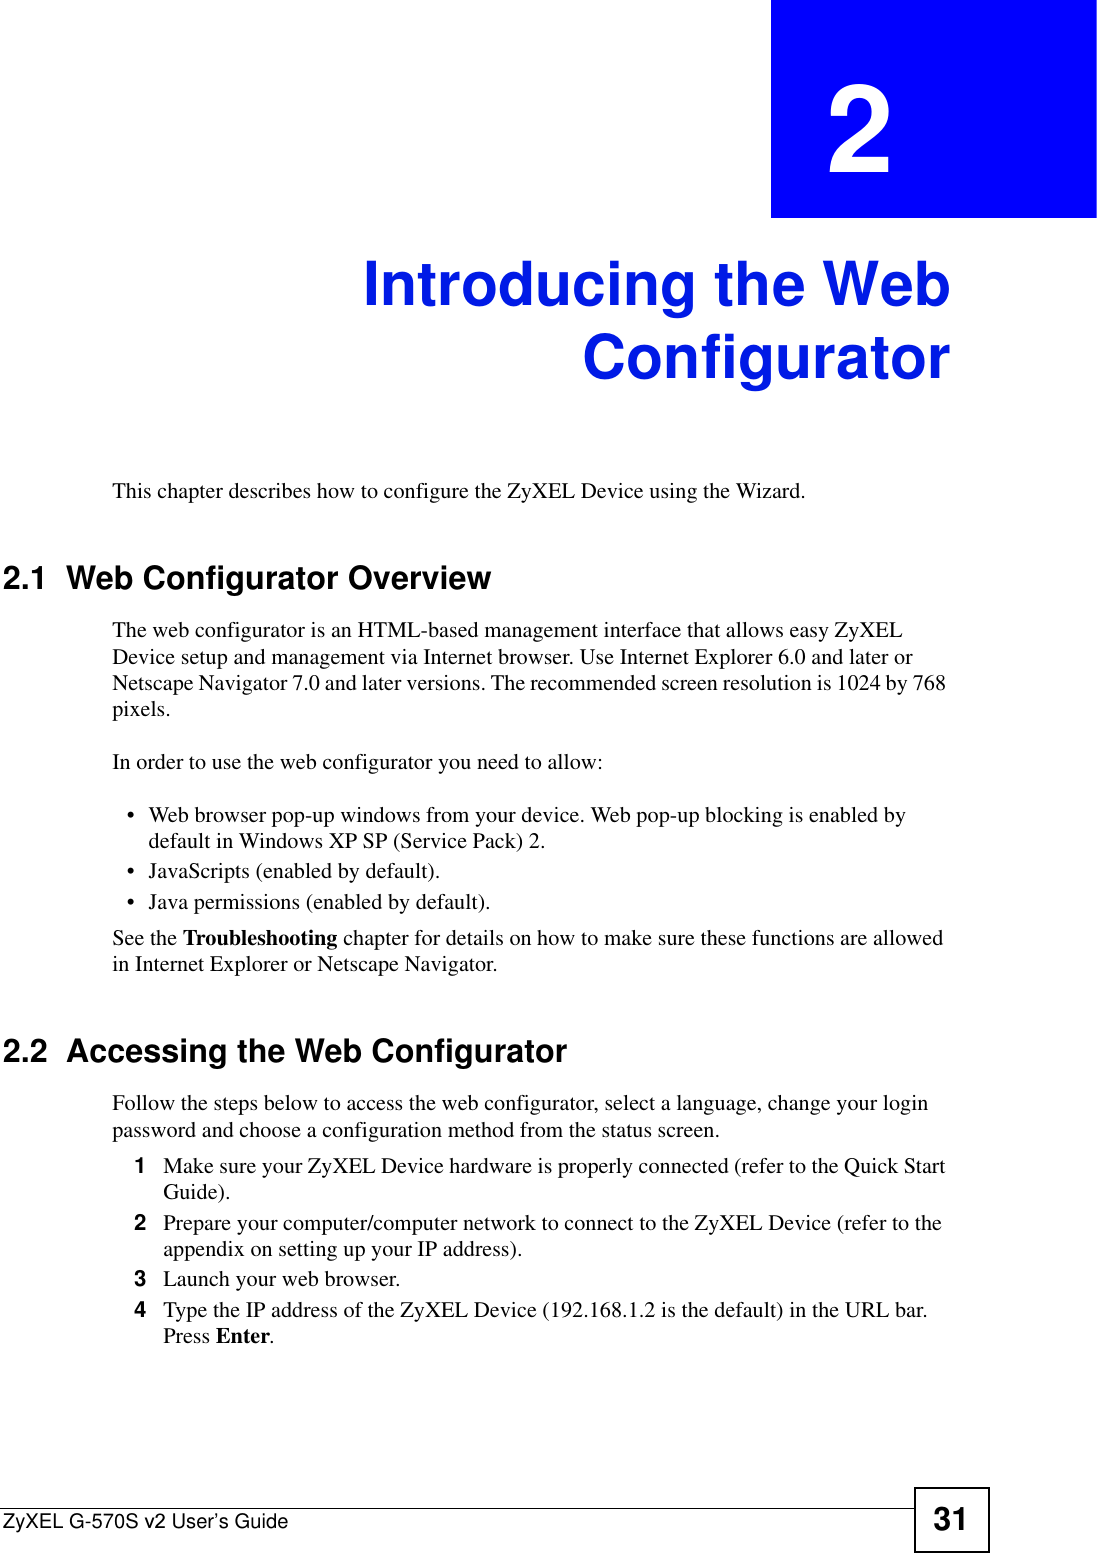 ZyXEL G-570S v2 User’s Guide 31CHAPTER  2 Introducing the WebConfiguratorThis chapter describes how to configure the ZyXEL Device using the Wizard.2.1  Web Configurator OverviewThe web configurator is an HTML-based management interface that allows easy ZyXEL Device setup and management via Internet browser. Use Internet Explorer 6.0 and later or Netscape Navigator 7.0 and later versions. The recommended screen resolution is 1024 by 768 pixels.In order to use the web configurator you need to allow:• Web browser pop-up windows from your device. Web pop-up blocking is enabled by default in Windows XP SP (Service Pack) 2.• JavaScripts (enabled by default).• Java permissions (enabled by default).See the Troubleshooting chapter for details on how to make sure these functions are allowed in Internet Explorer or Netscape Navigator. 2.2  Accessing the Web ConfiguratorFollow the steps below to access the web configurator, select a language, change your login password and choose a configuration method from the status screen. 1Make sure your ZyXEL Device hardware is properly connected (refer to the Quick Start Guide).2Prepare your computer/computer network to connect to the ZyXEL Device (refer to the appendix on setting up your IP address).3Launch your web browser.4Type the IP address of the ZyXEL Device (192.168.1.2 is the default) in the URL bar. Press Enter.